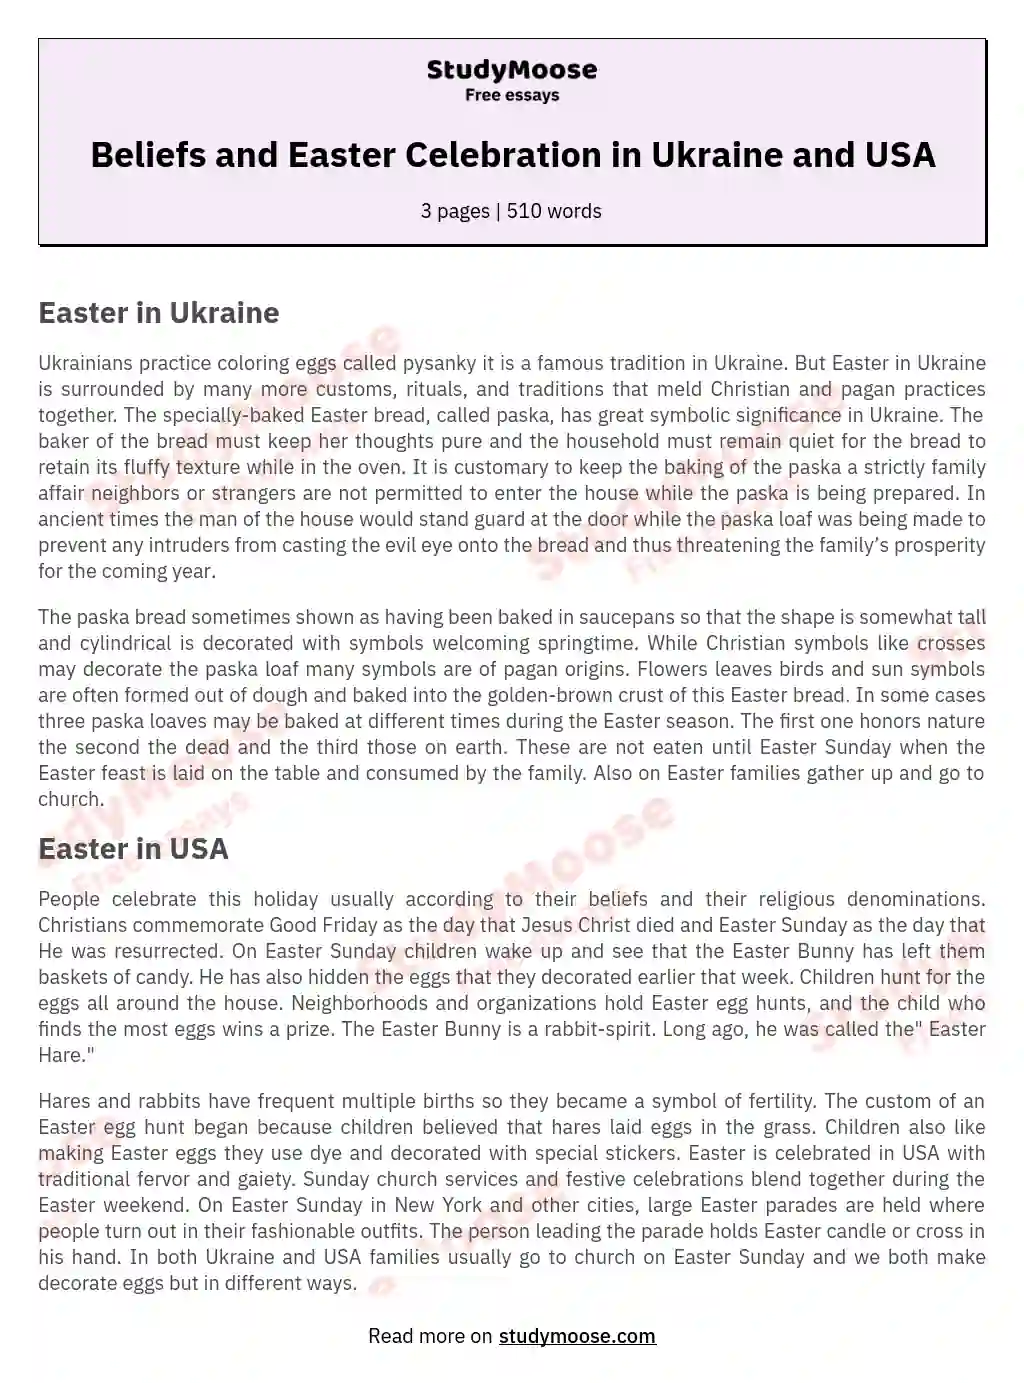 Beliefs and Easter Celebration in Ukraine and USA